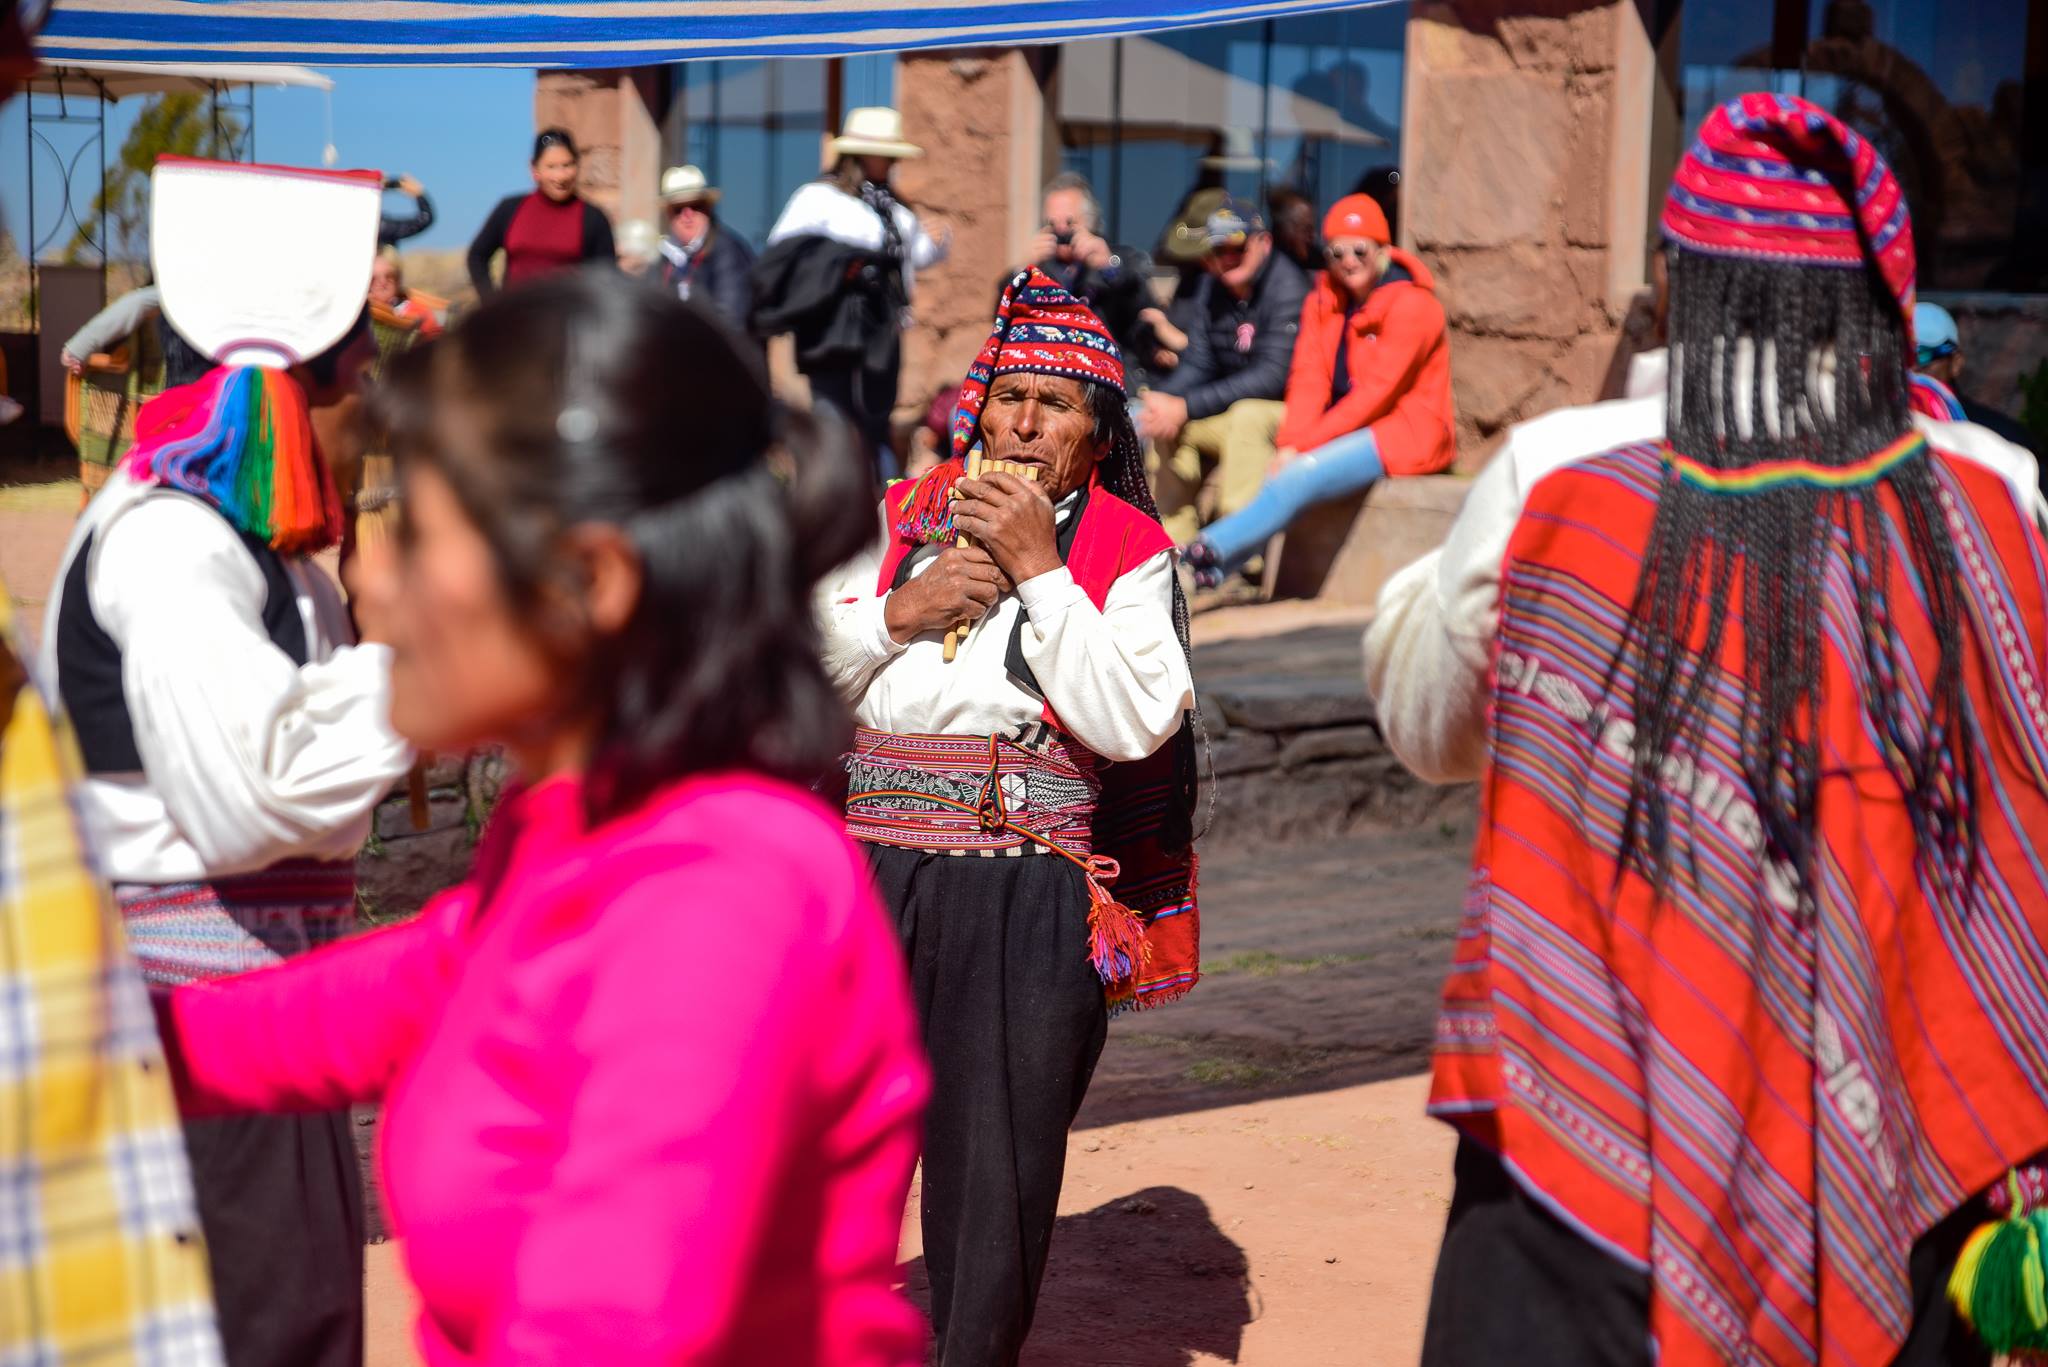 Peru’s ephemeral floating islands, golden-hued and gracefully delicate, appear like a mirage in Lake Titicaca. But their origins, paradoxically, reflect the strength and tenacity of the native peoples who created them.